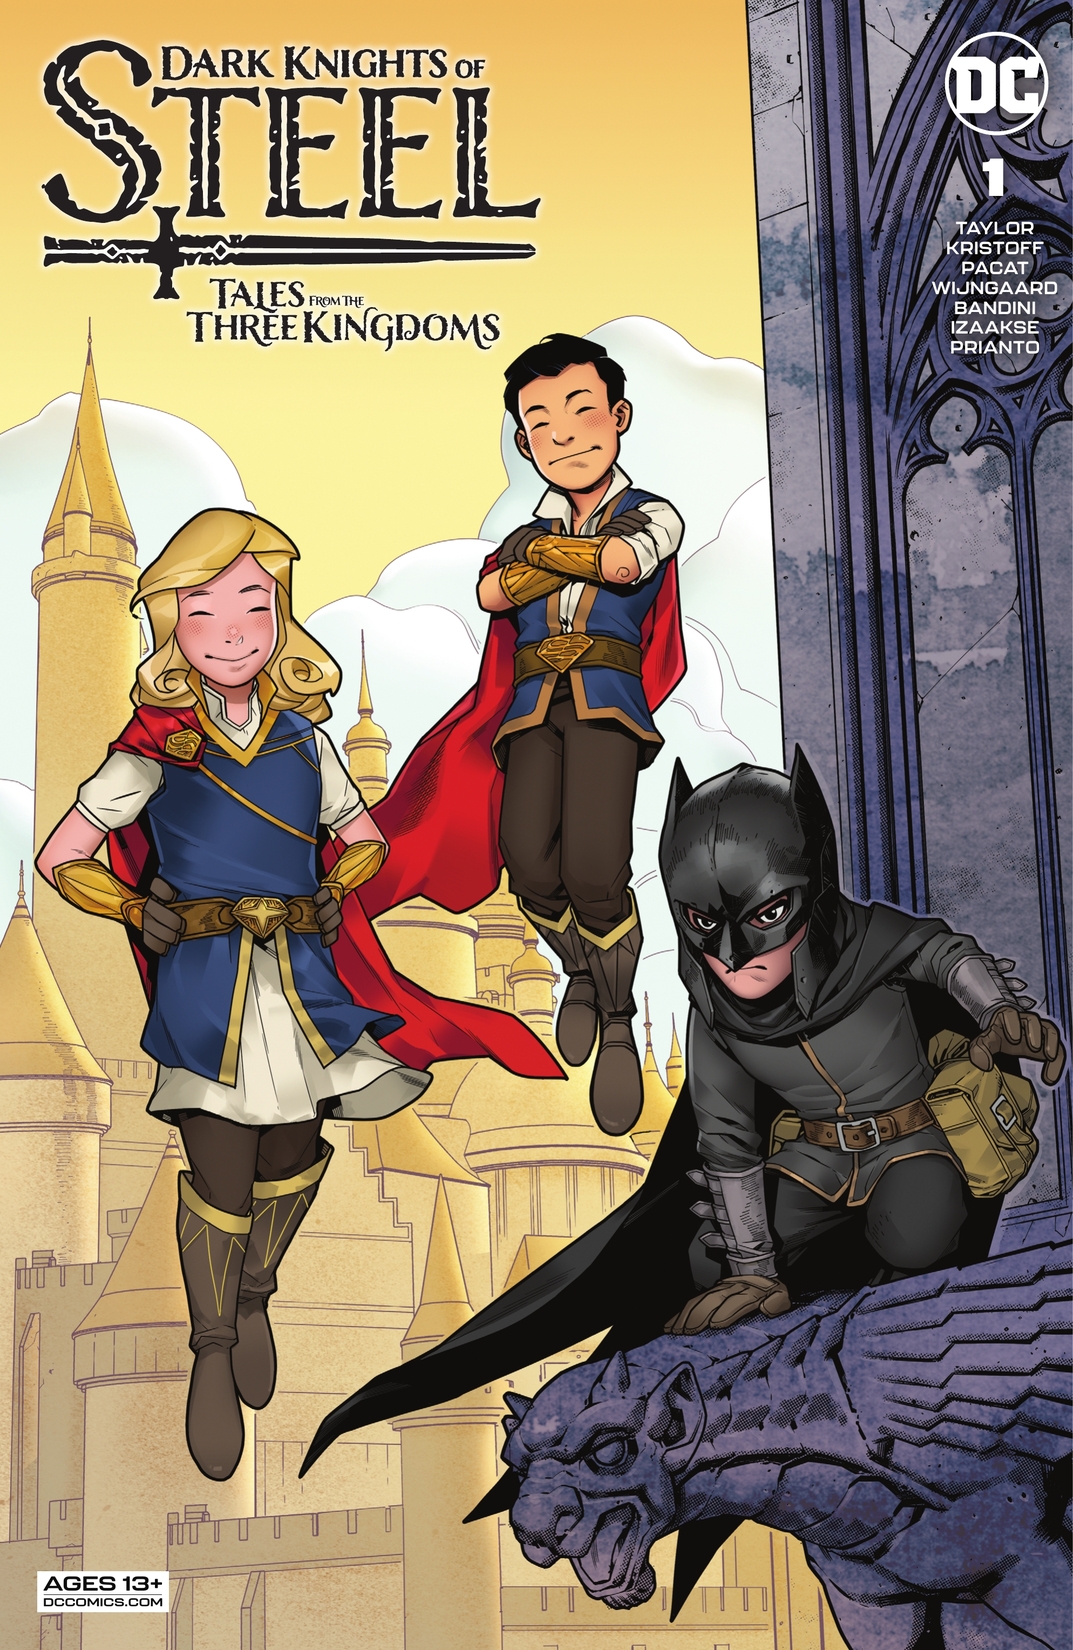 Dark Knights of Steel: Tales from the Three Kingdoms #1 preview images